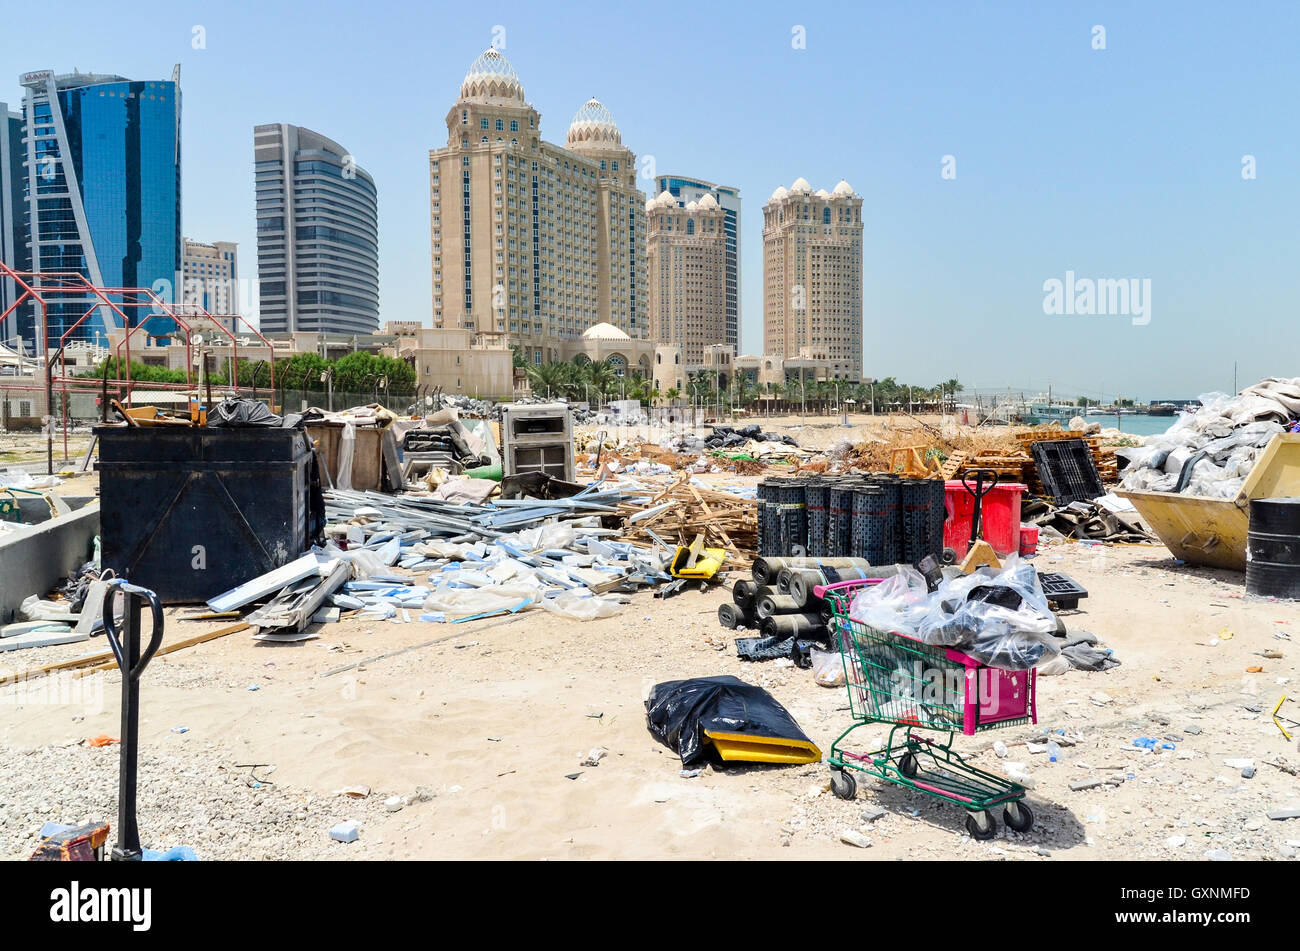 Trash on the beach in the West Bay financial district, Doha, Qatar Stock Photo